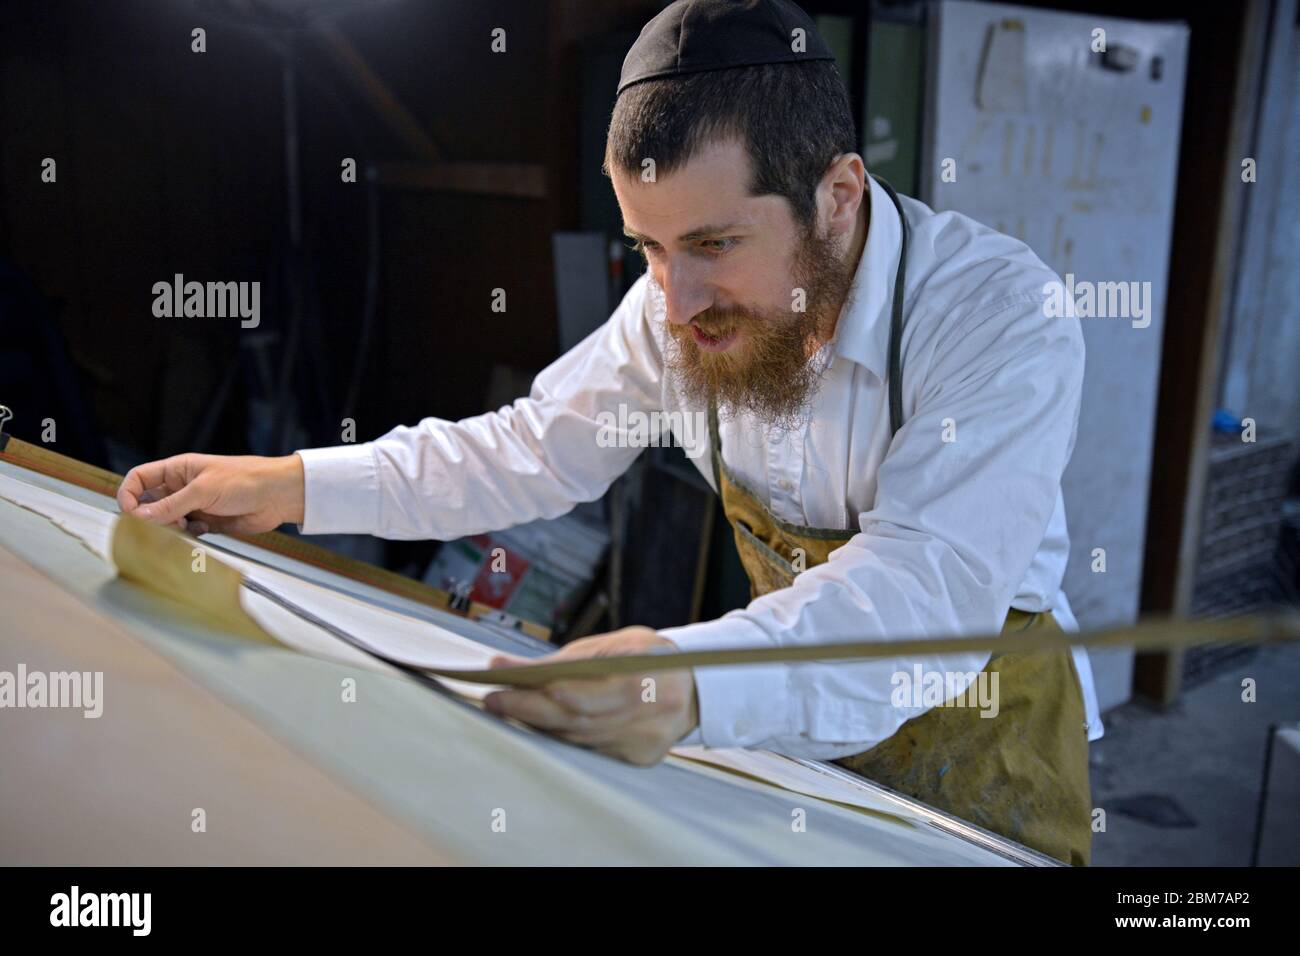 A Rabbi and master craftsman cuts a new sheet of parchment made in his basement workshop.It's to be used for religious articles. Stock Photo